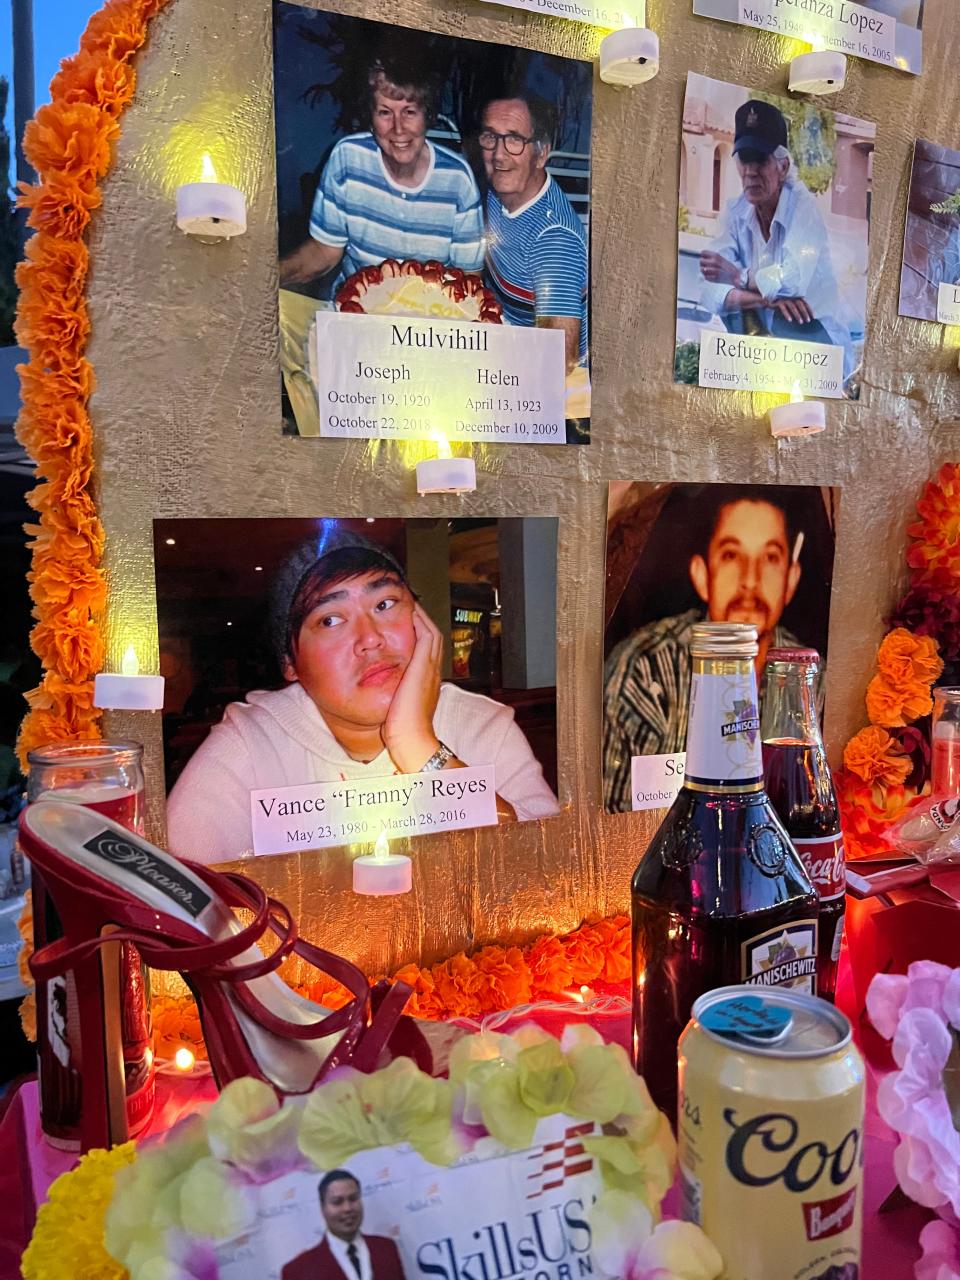 Photos of dead family members are displayed alongside "ofrendas," or offerings," including beer, at the Día de Los Muertos celebration at the Hollywood Forever Cemetery in Los Angeles on Saturday, Oct. 28, 2023.